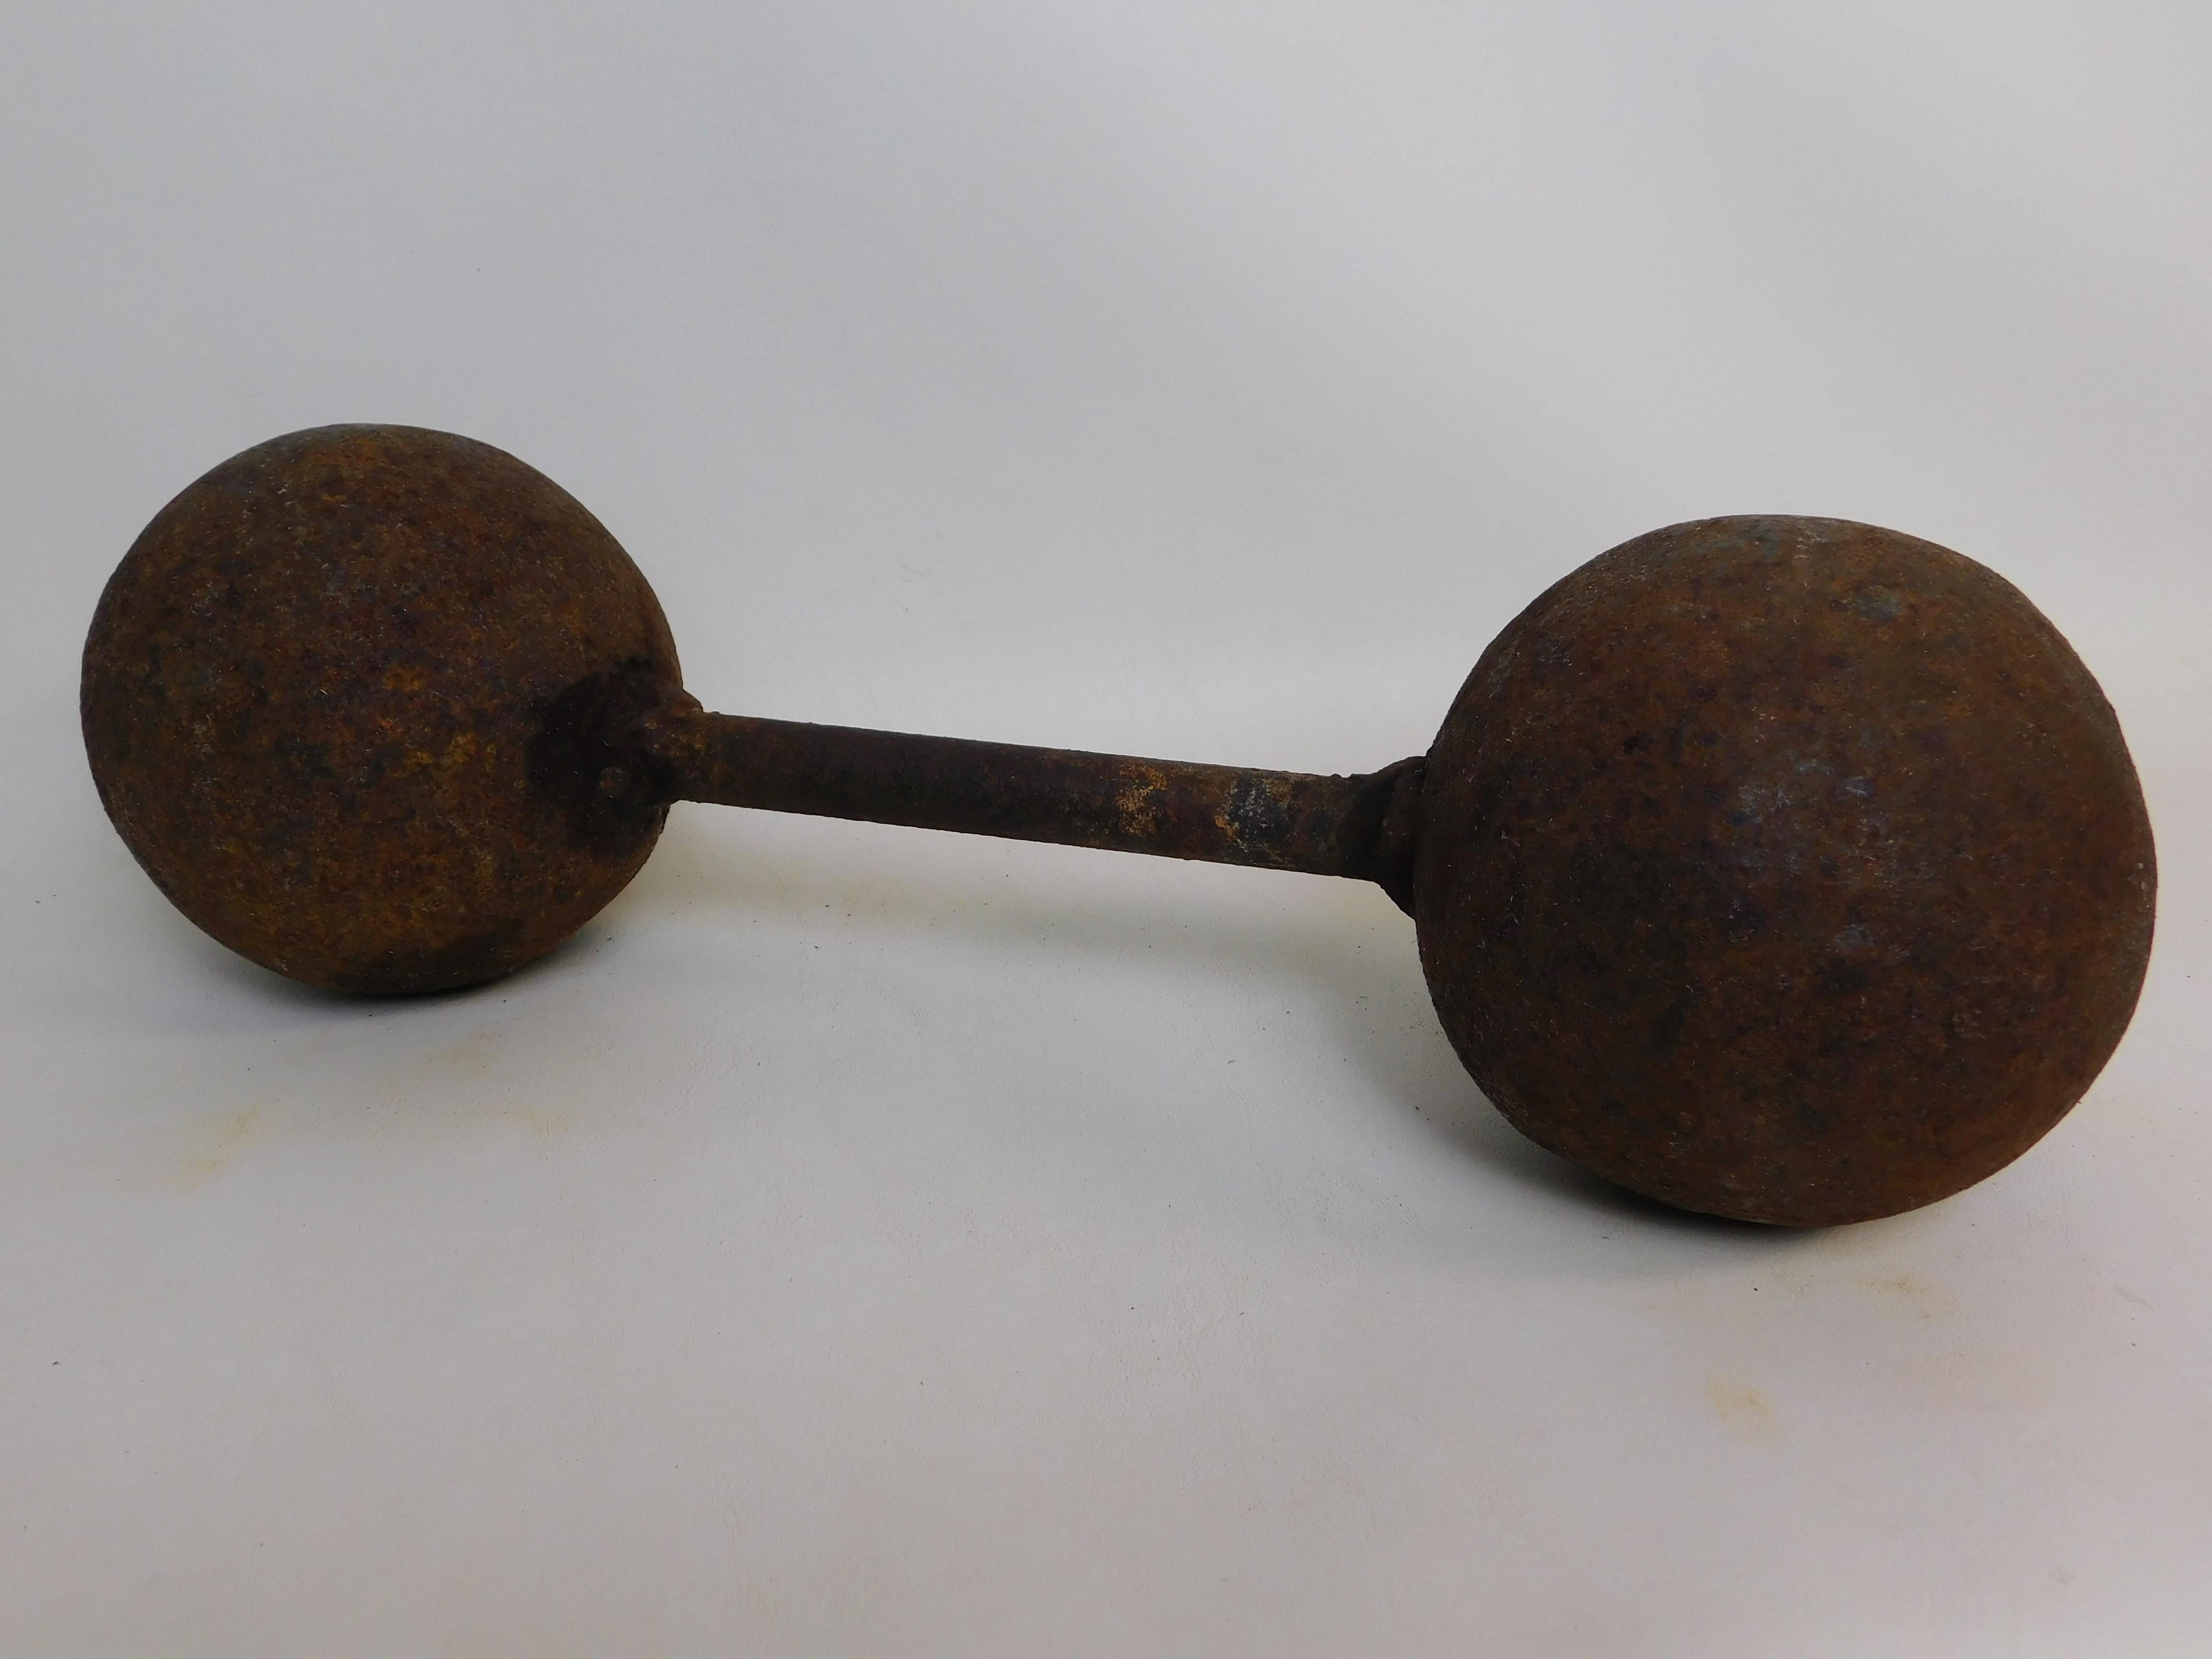 This is a 18th century circa 1776 heavy iron metal bar shot double cannon ball connected by a metal bar. It weighs a heavy 50 pounds (22.6796 kilos), measures 16 inches long (40.64 cm), each ball 5 inches (12.7 cm) in diameter. 

Bar Shot/Chain